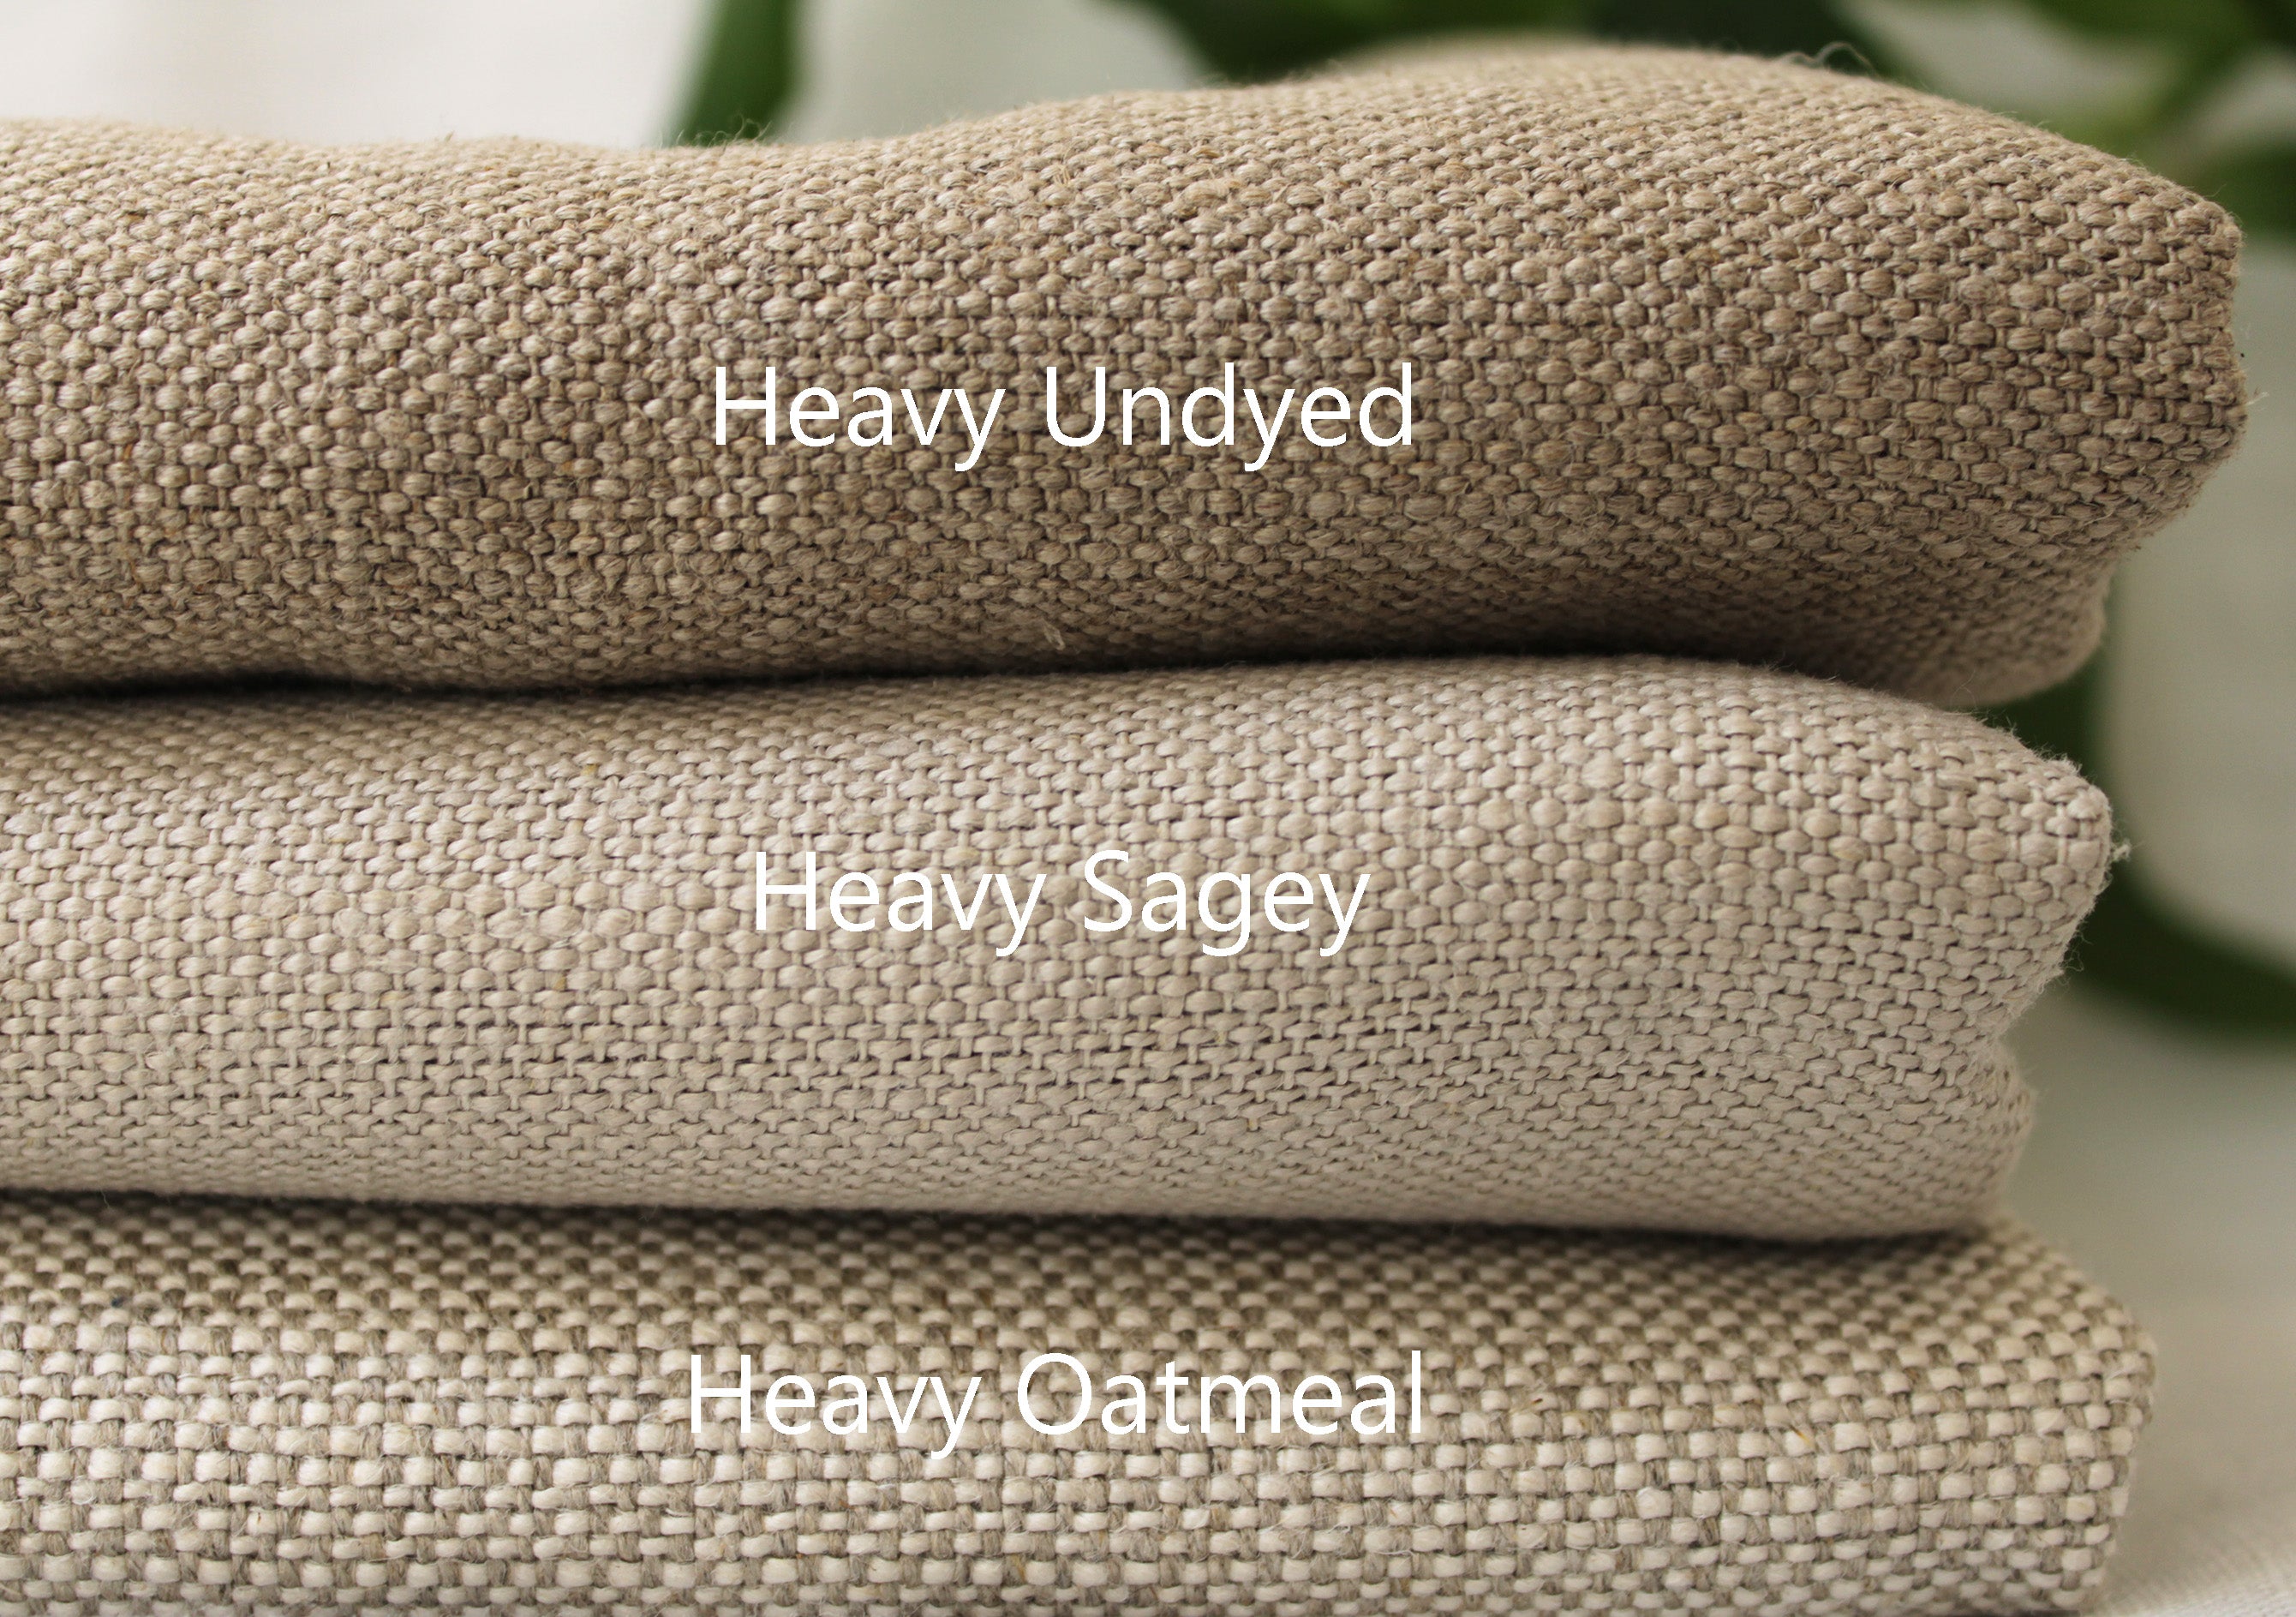 Upholstery Linen Fabric / Heavyweight Linen Fabric by the yard